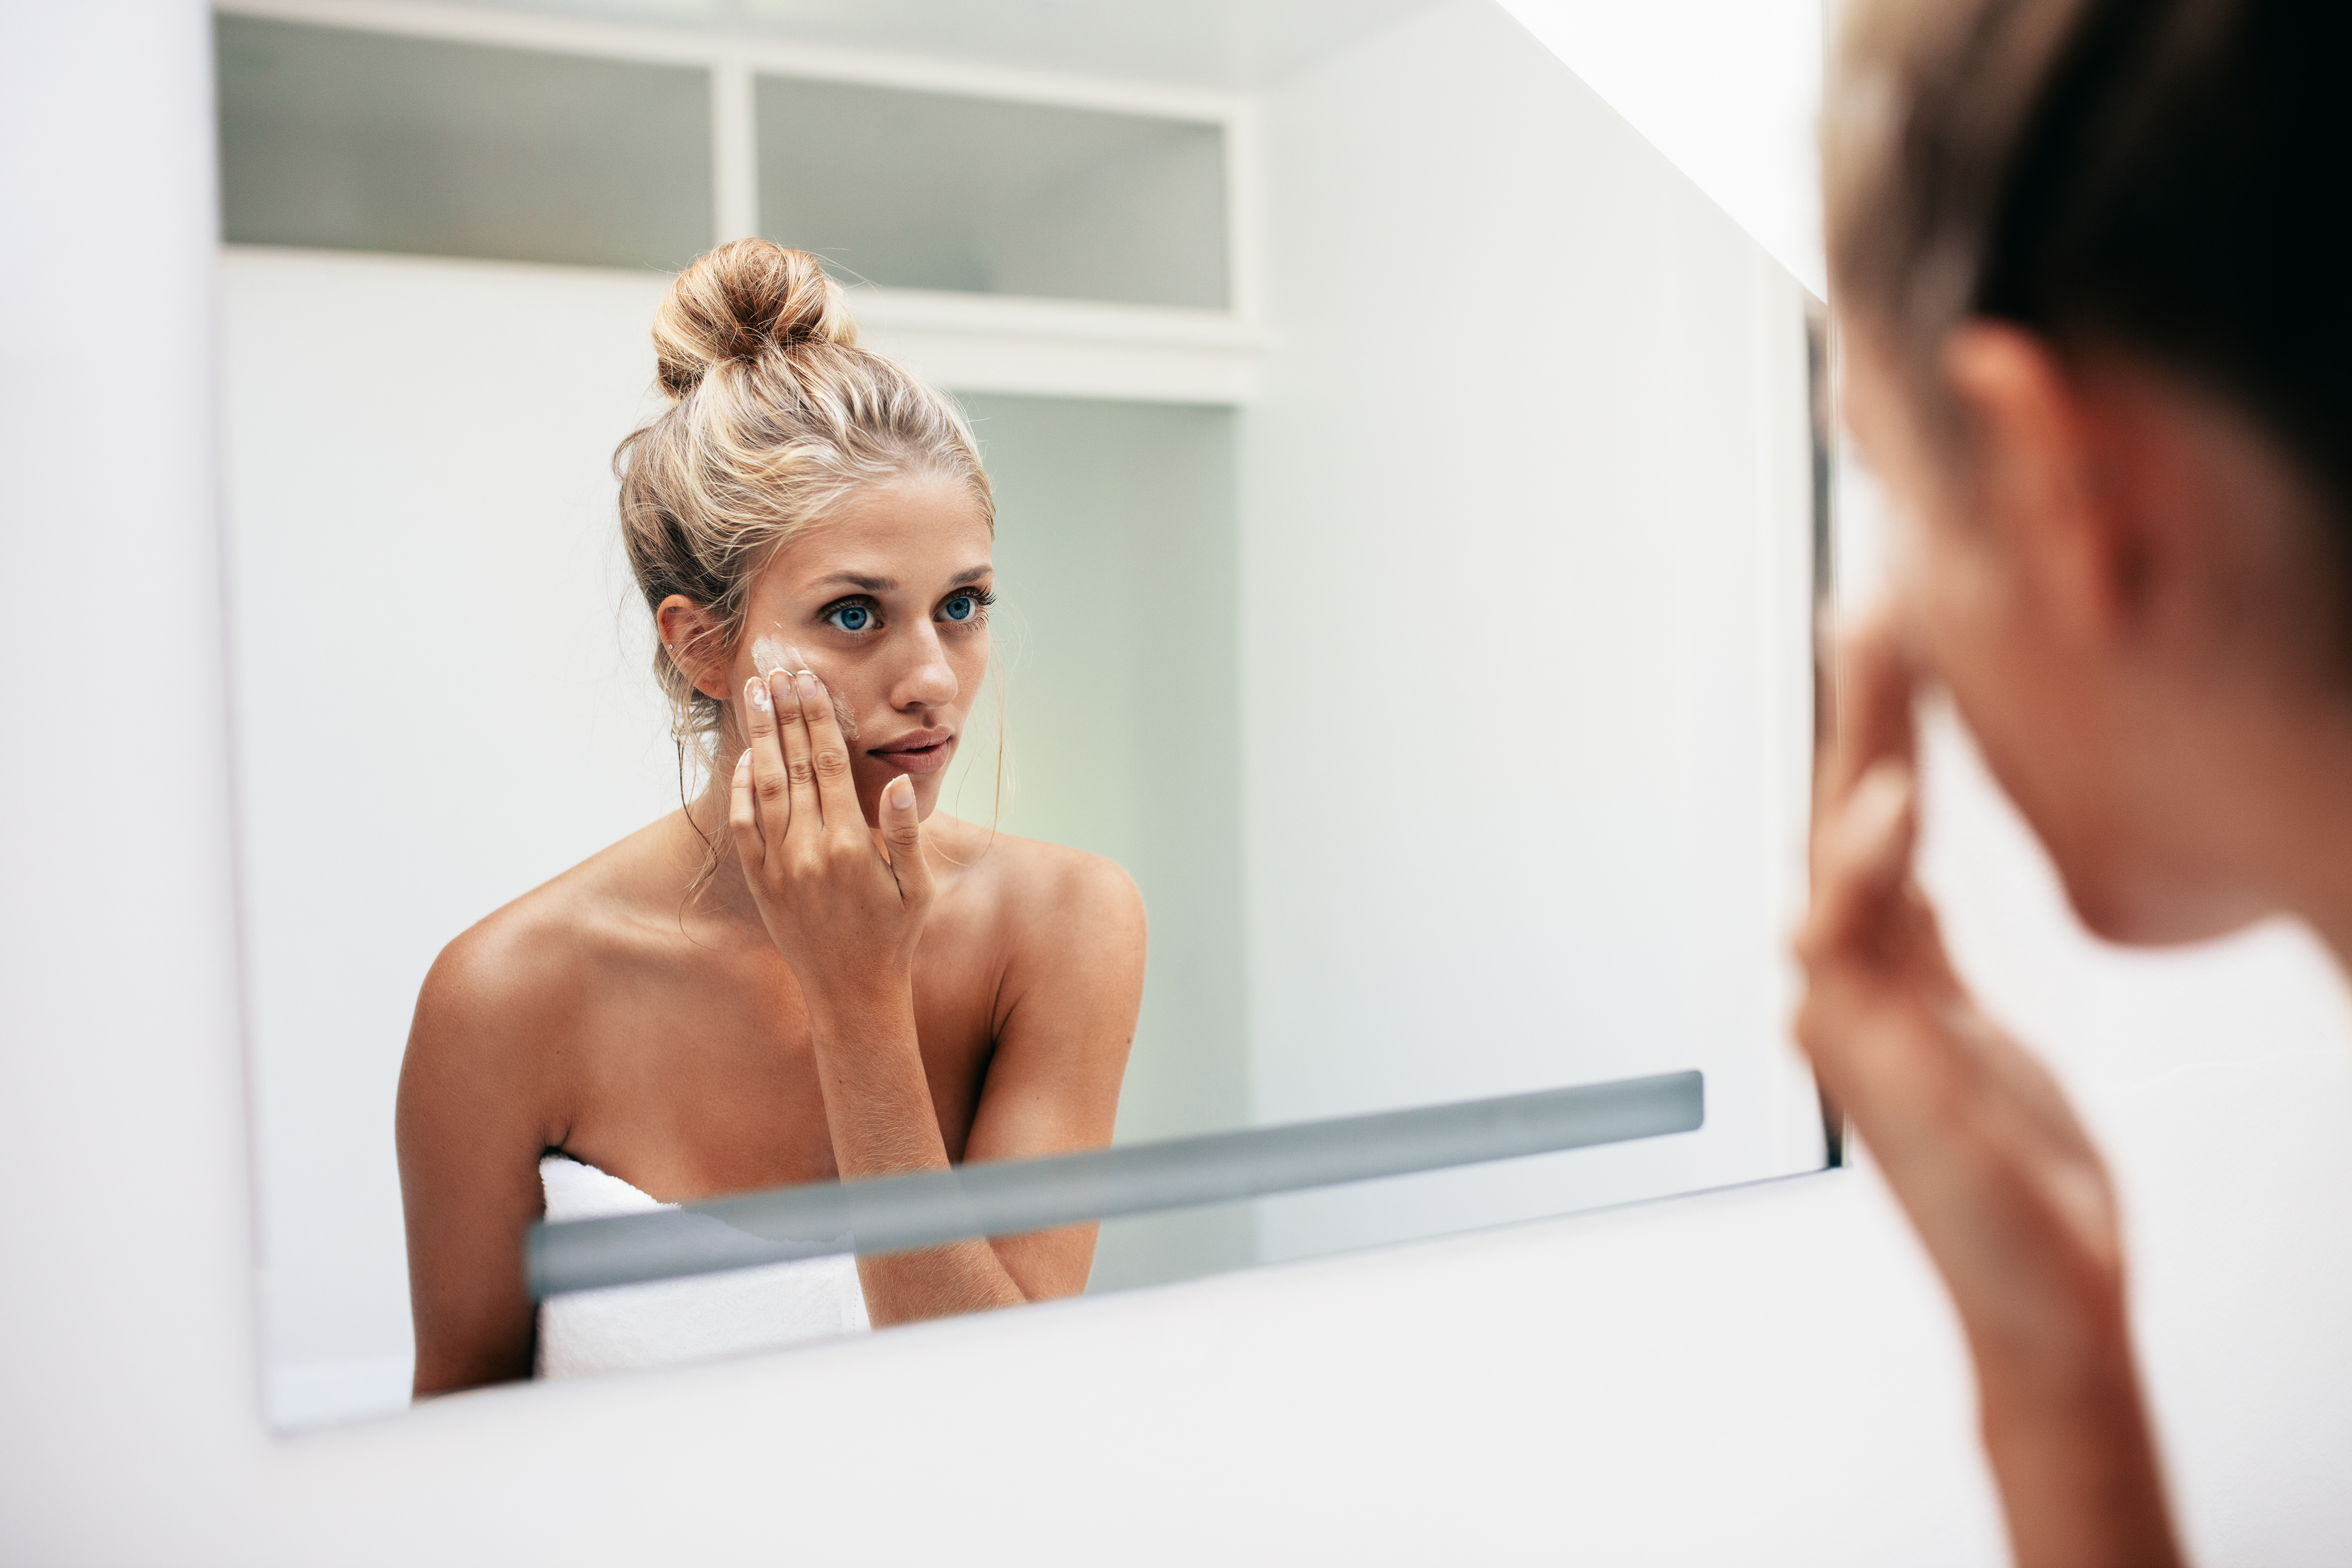 Reflection of a female in mirror rubbing cosmetic cream on her face. Female putting on moisturizer on her facial skin in bathroom.